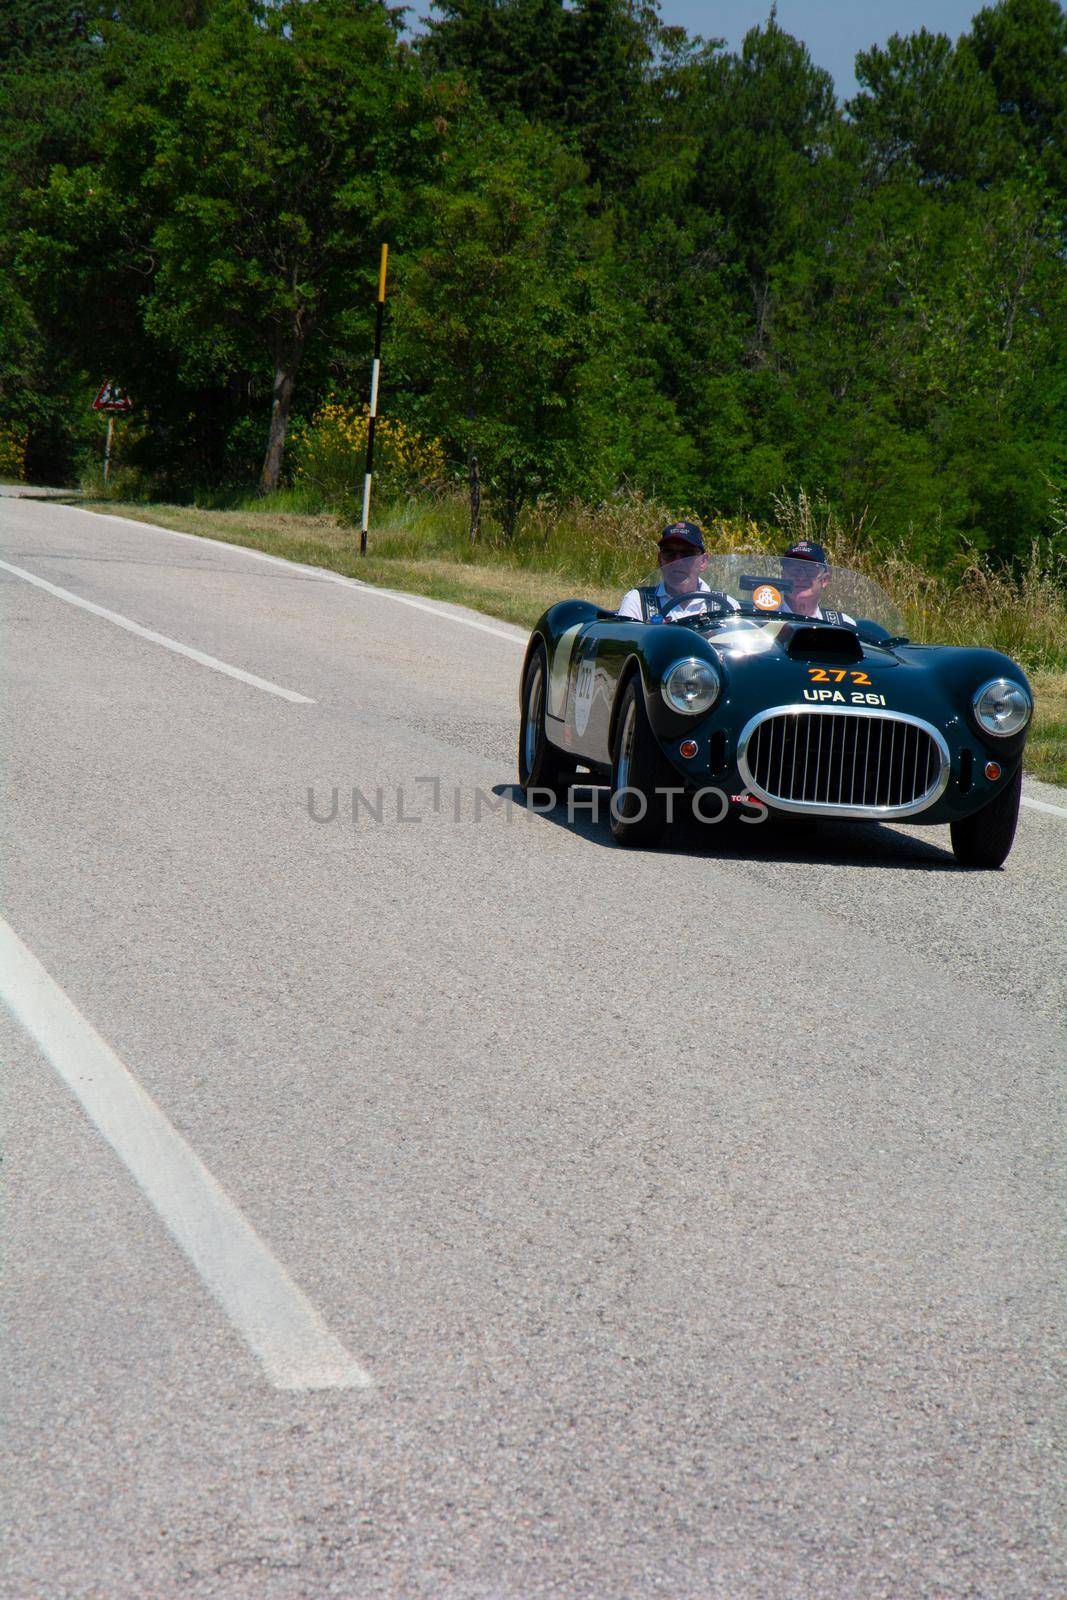 URBINO, ITALY - JUN 16 - 2022 : COOPER BRISTOL T25 BRISTOL 1953 on an old racing car in rally Mille Miglia 2022 the famous italian historical race (1927-1957